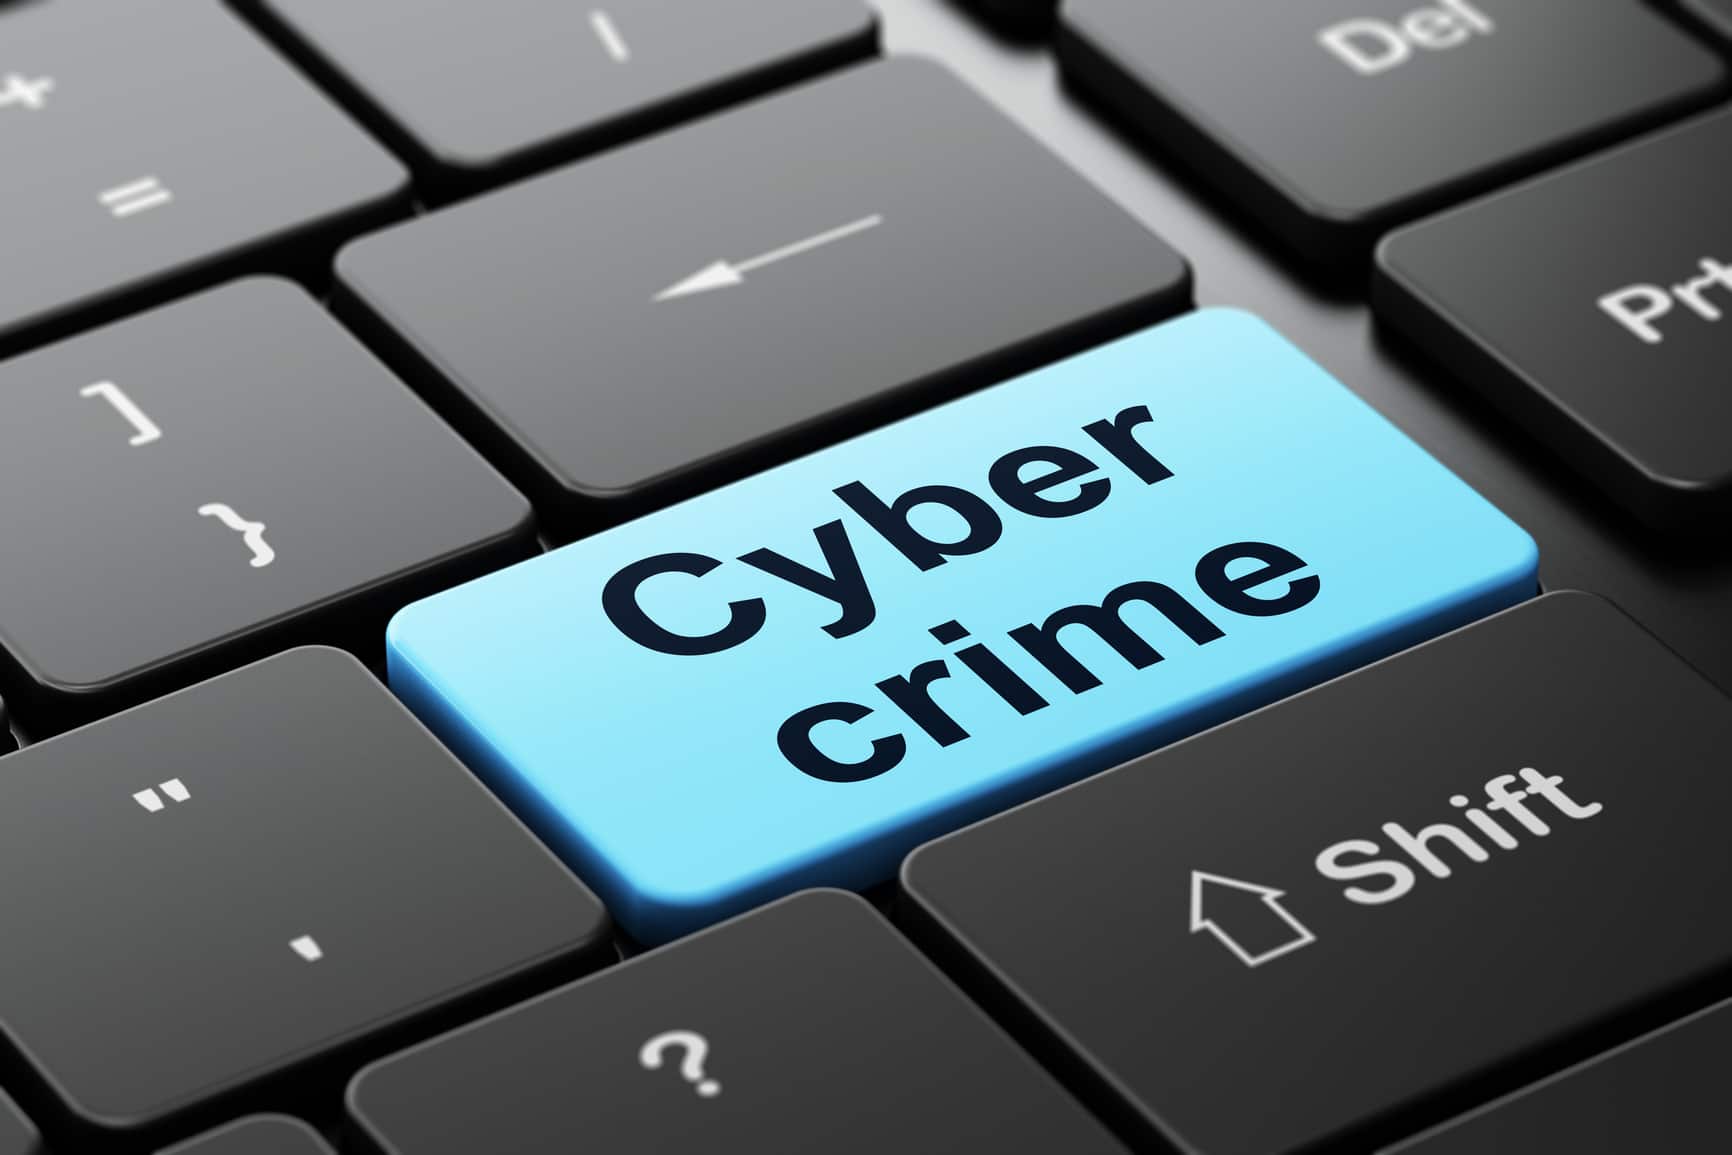 Cyber Crime Through the Eyes of a Normal Internet User